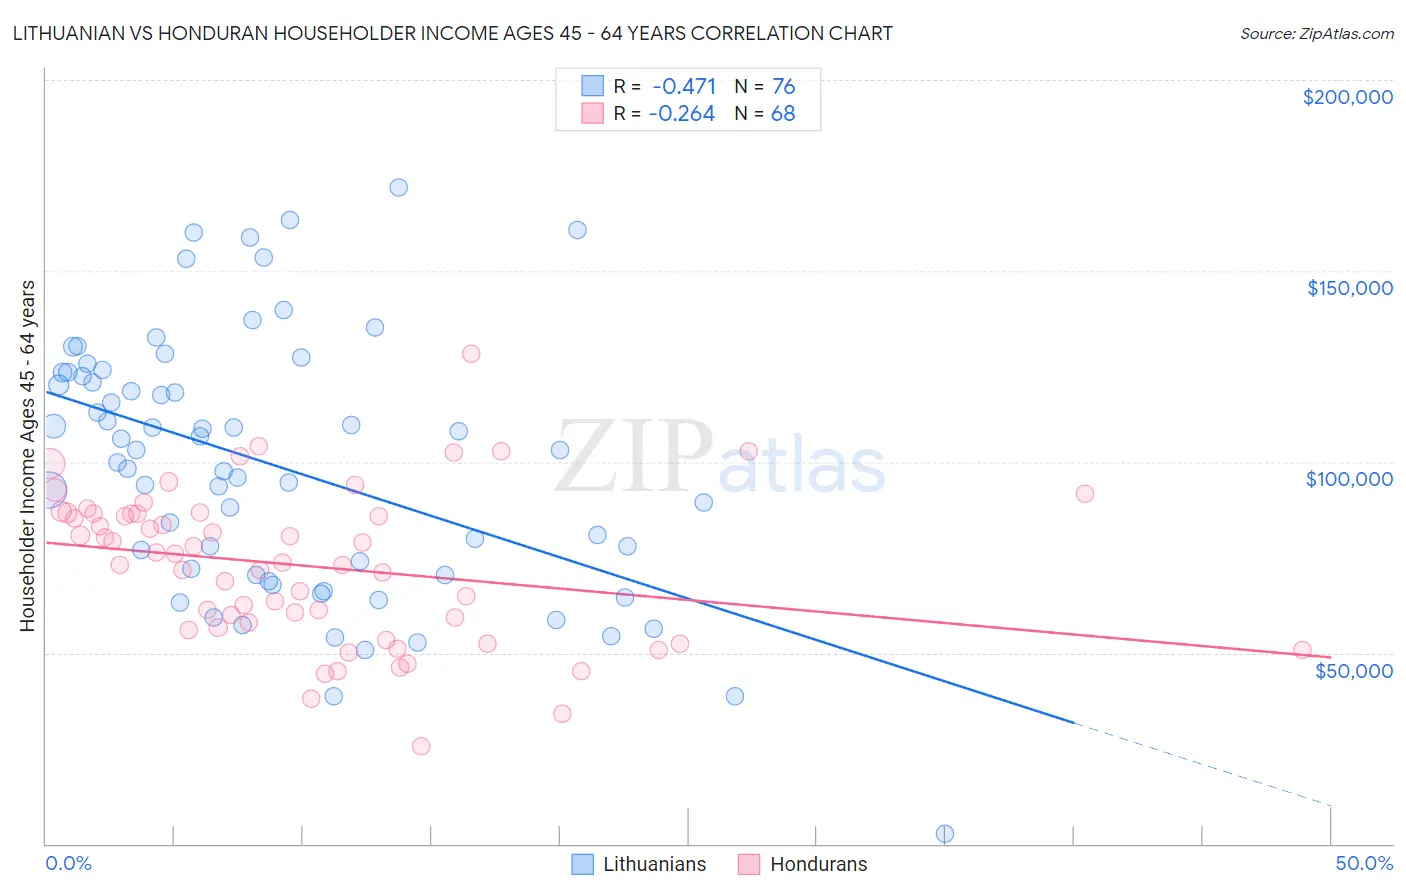 Lithuanian vs Honduran Householder Income Ages 45 - 64 years